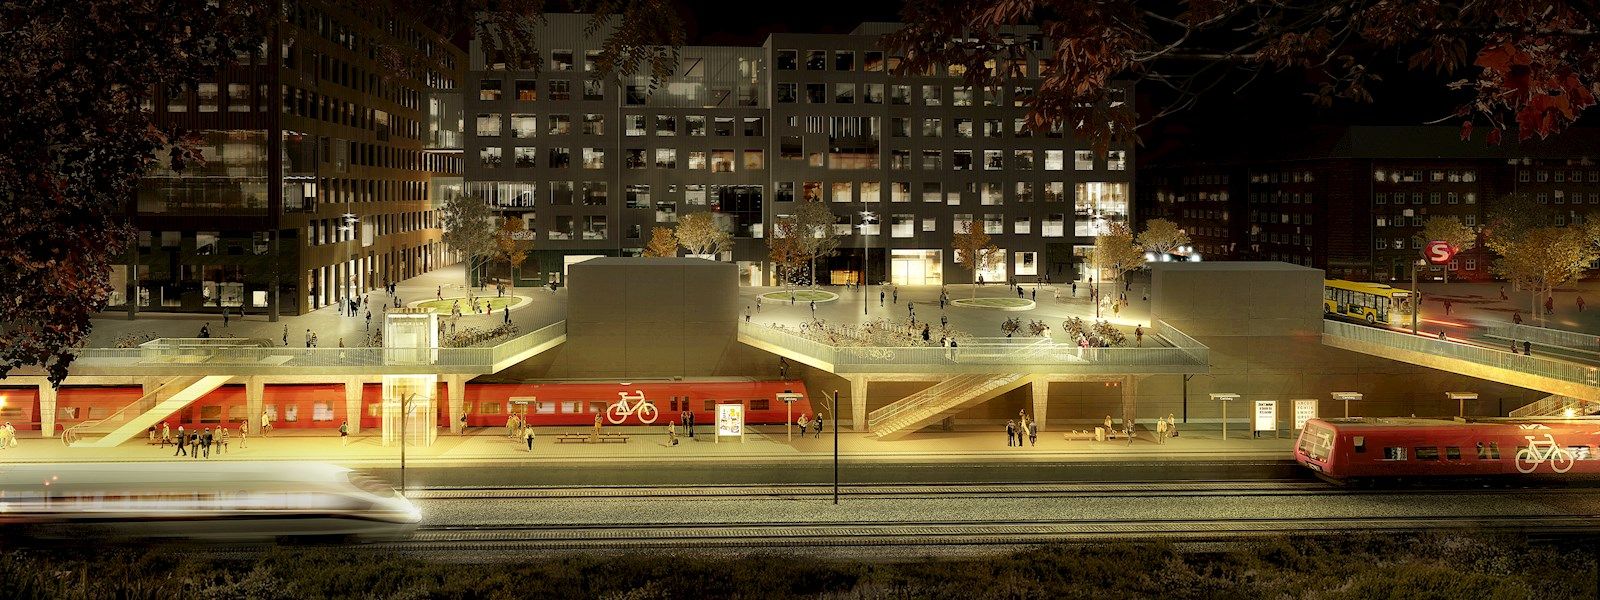 Copenhagen opens probably the best commuter train station in the world